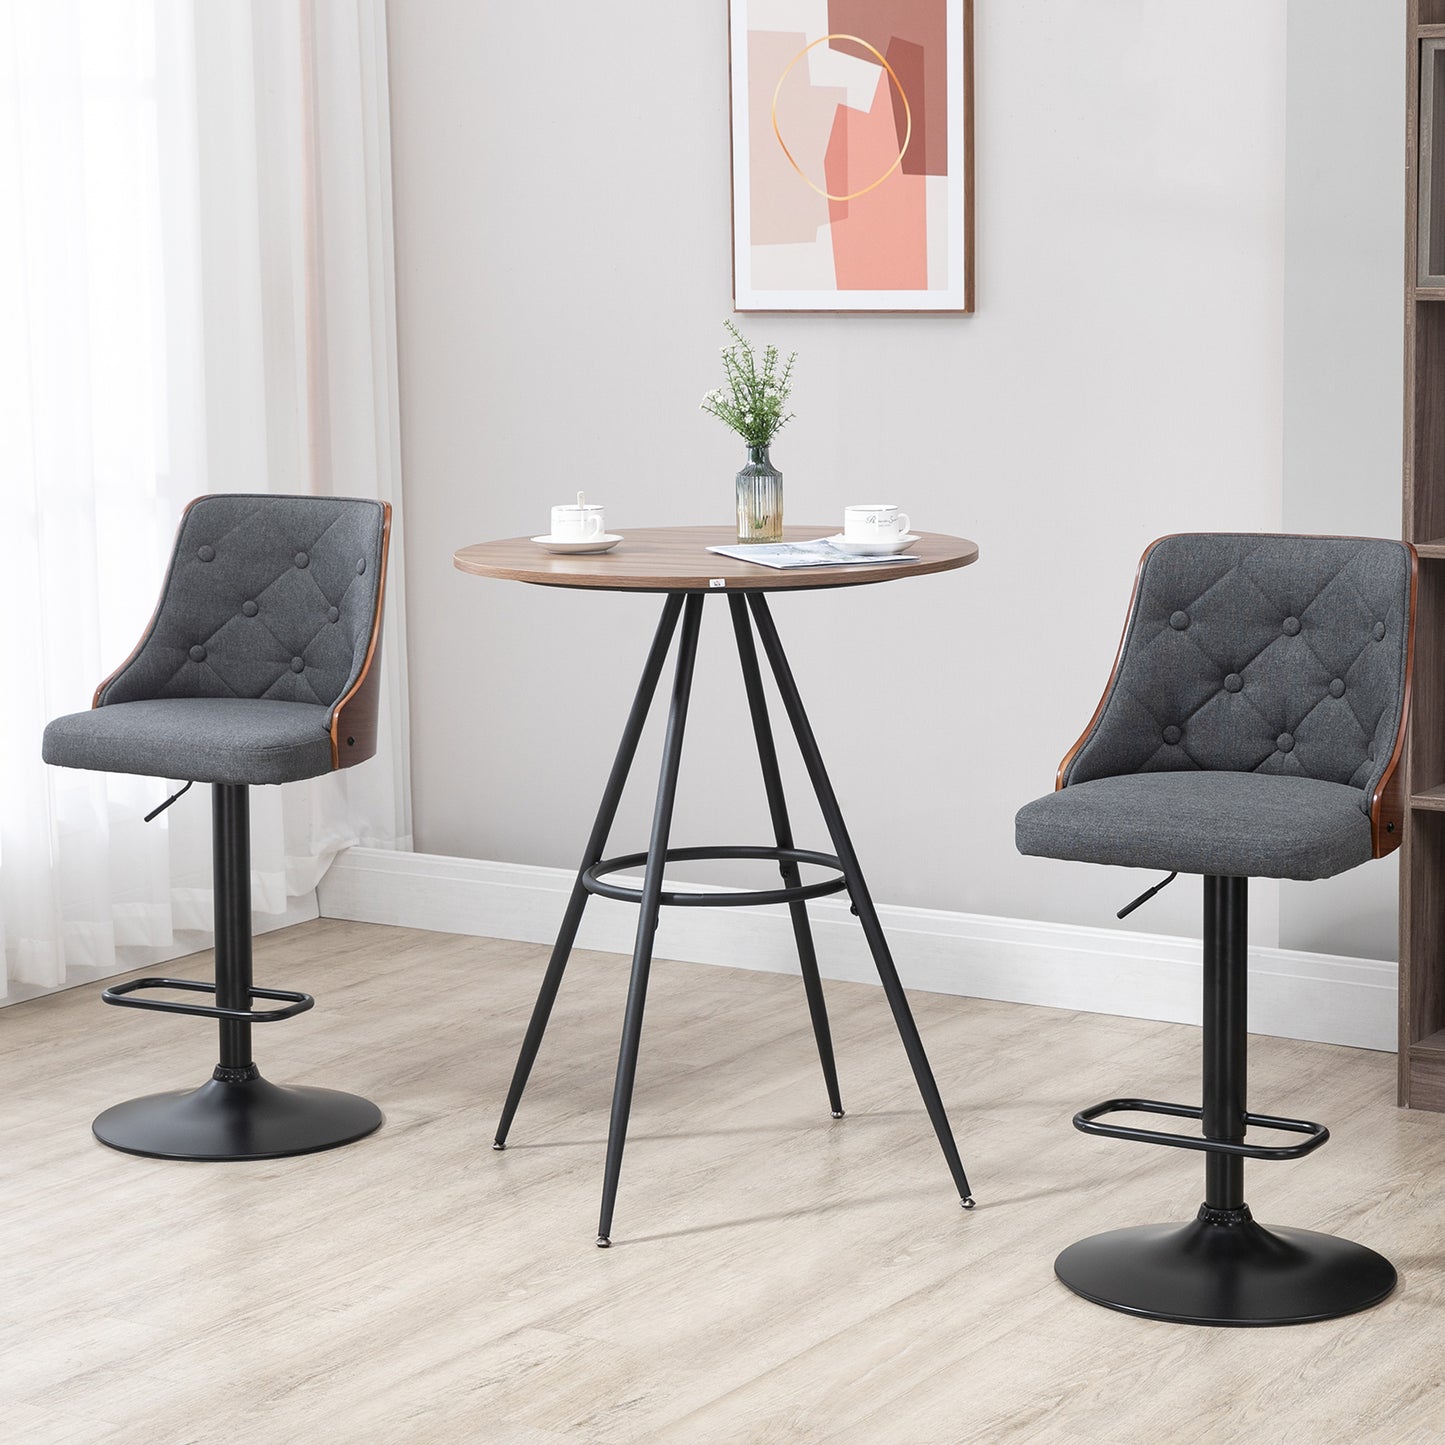 HOMCOM Round Counter Bistro Bar Table with Fixed Tabletop and Steel Legs, Circular Cocktail Table for Dining Room, Home Bar